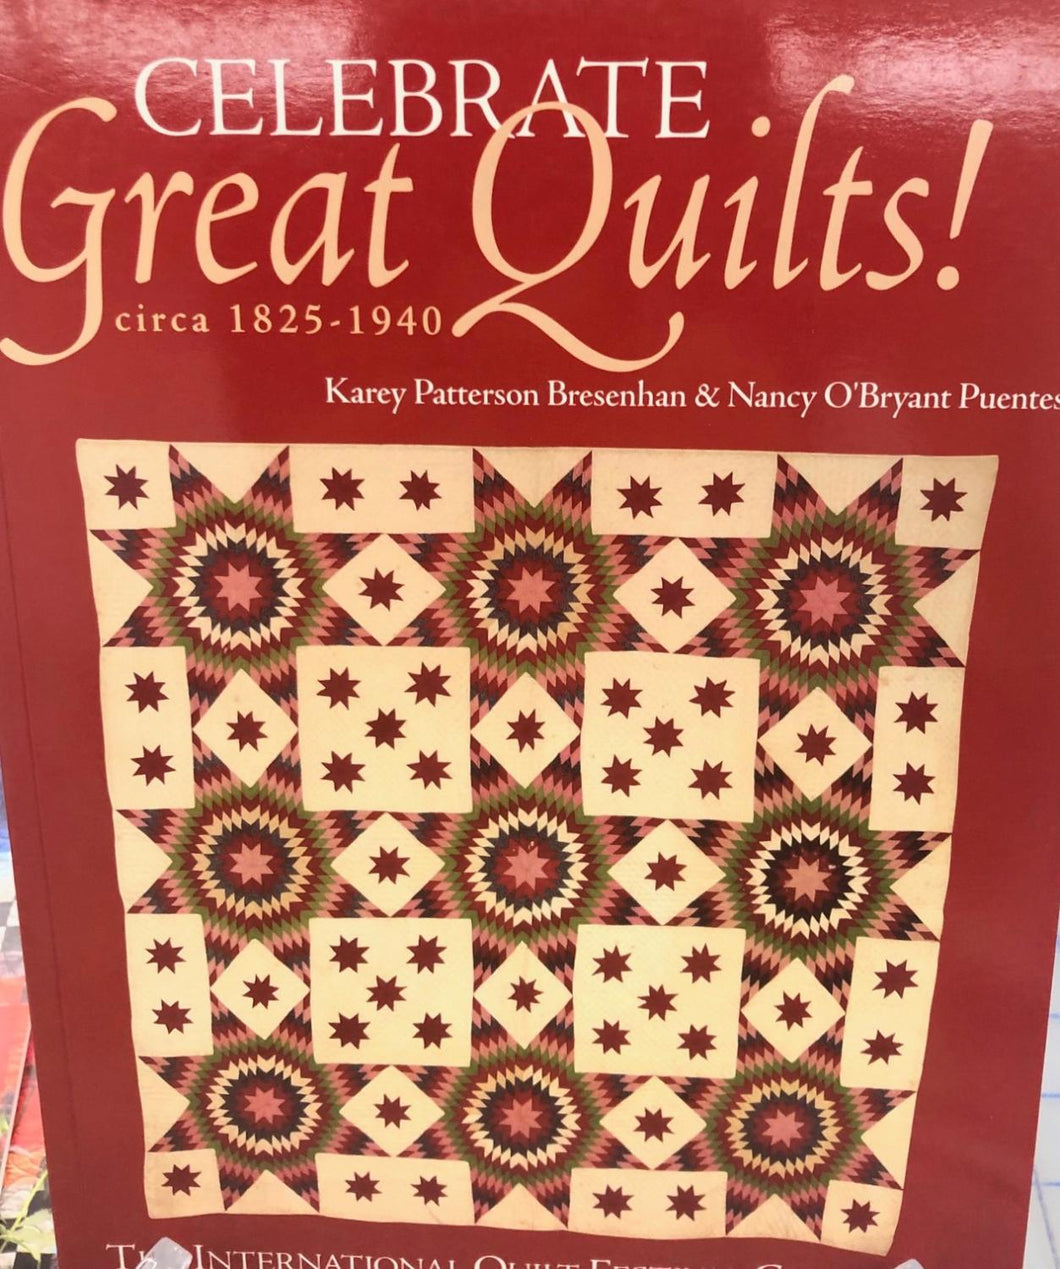 Celebrate Great Quilts!  circa 1825-1940